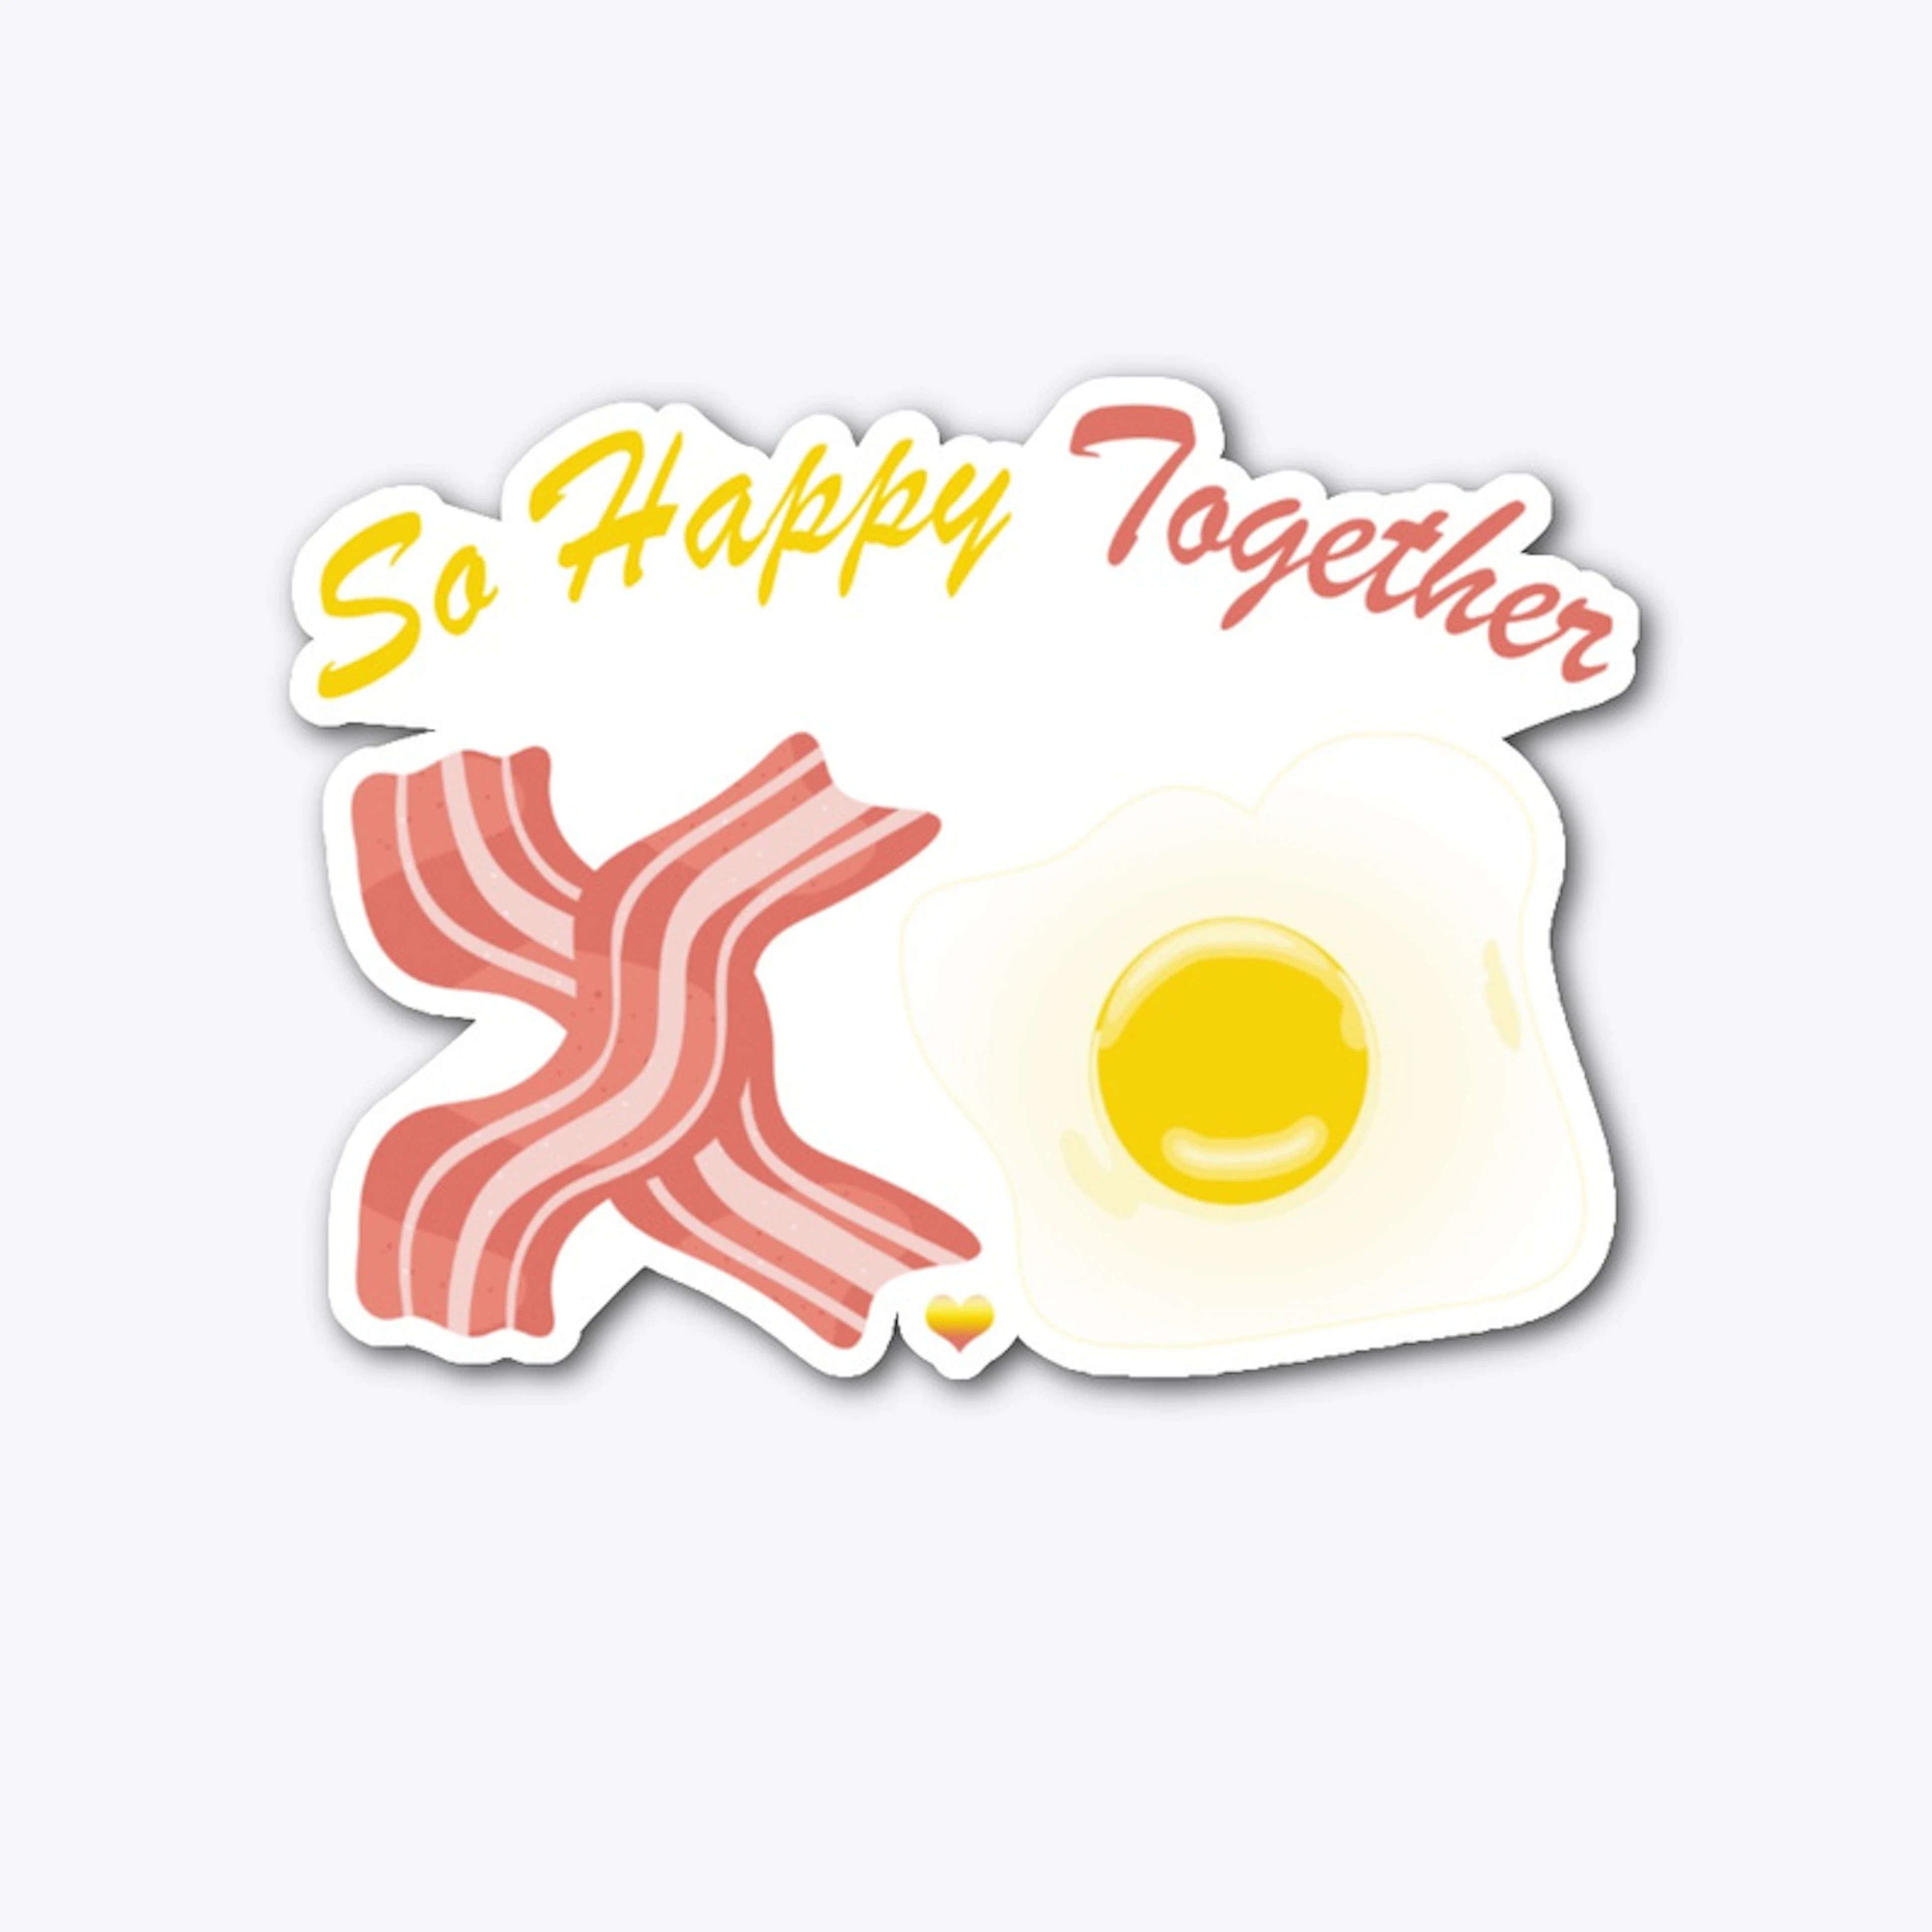 So Happy Together, bacon and eggs